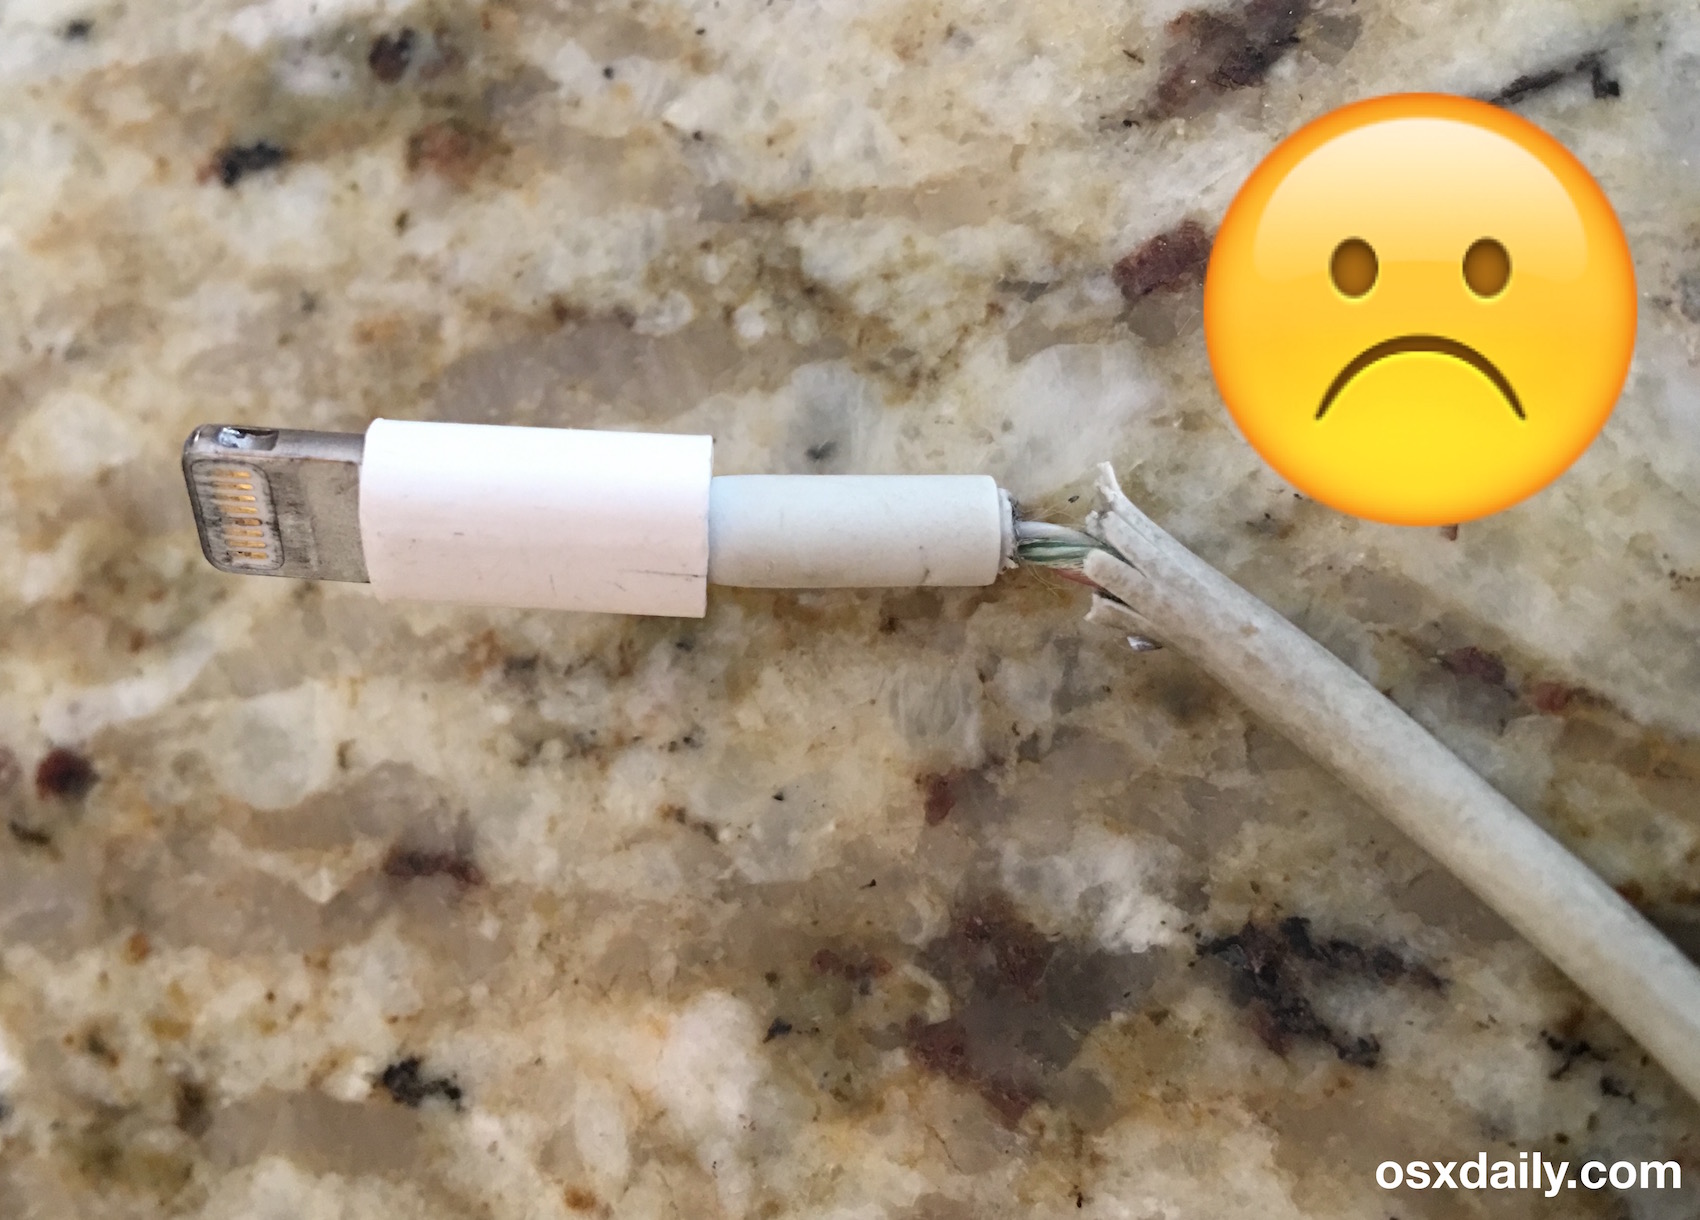 A Broken iPhone Charger: Fix it? Replace it?